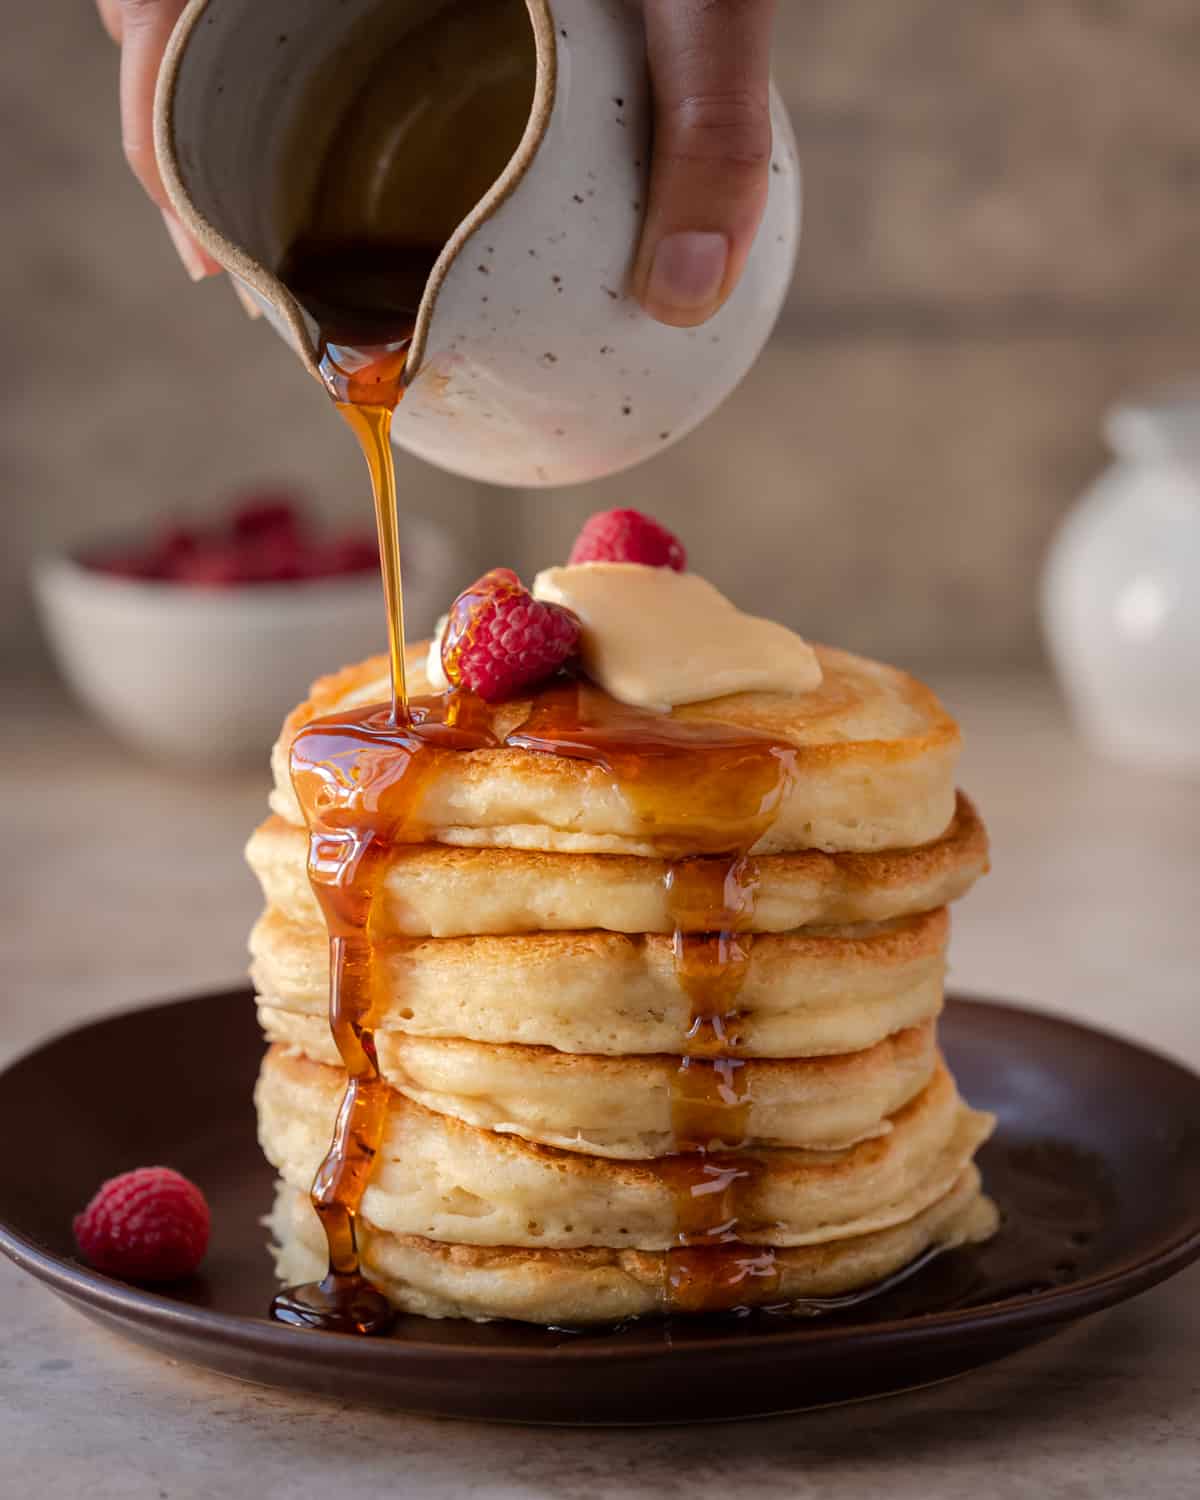 woman's hands pouring maple syrup onto a stack of fluffy golden vegan pancakes on a brown plate.